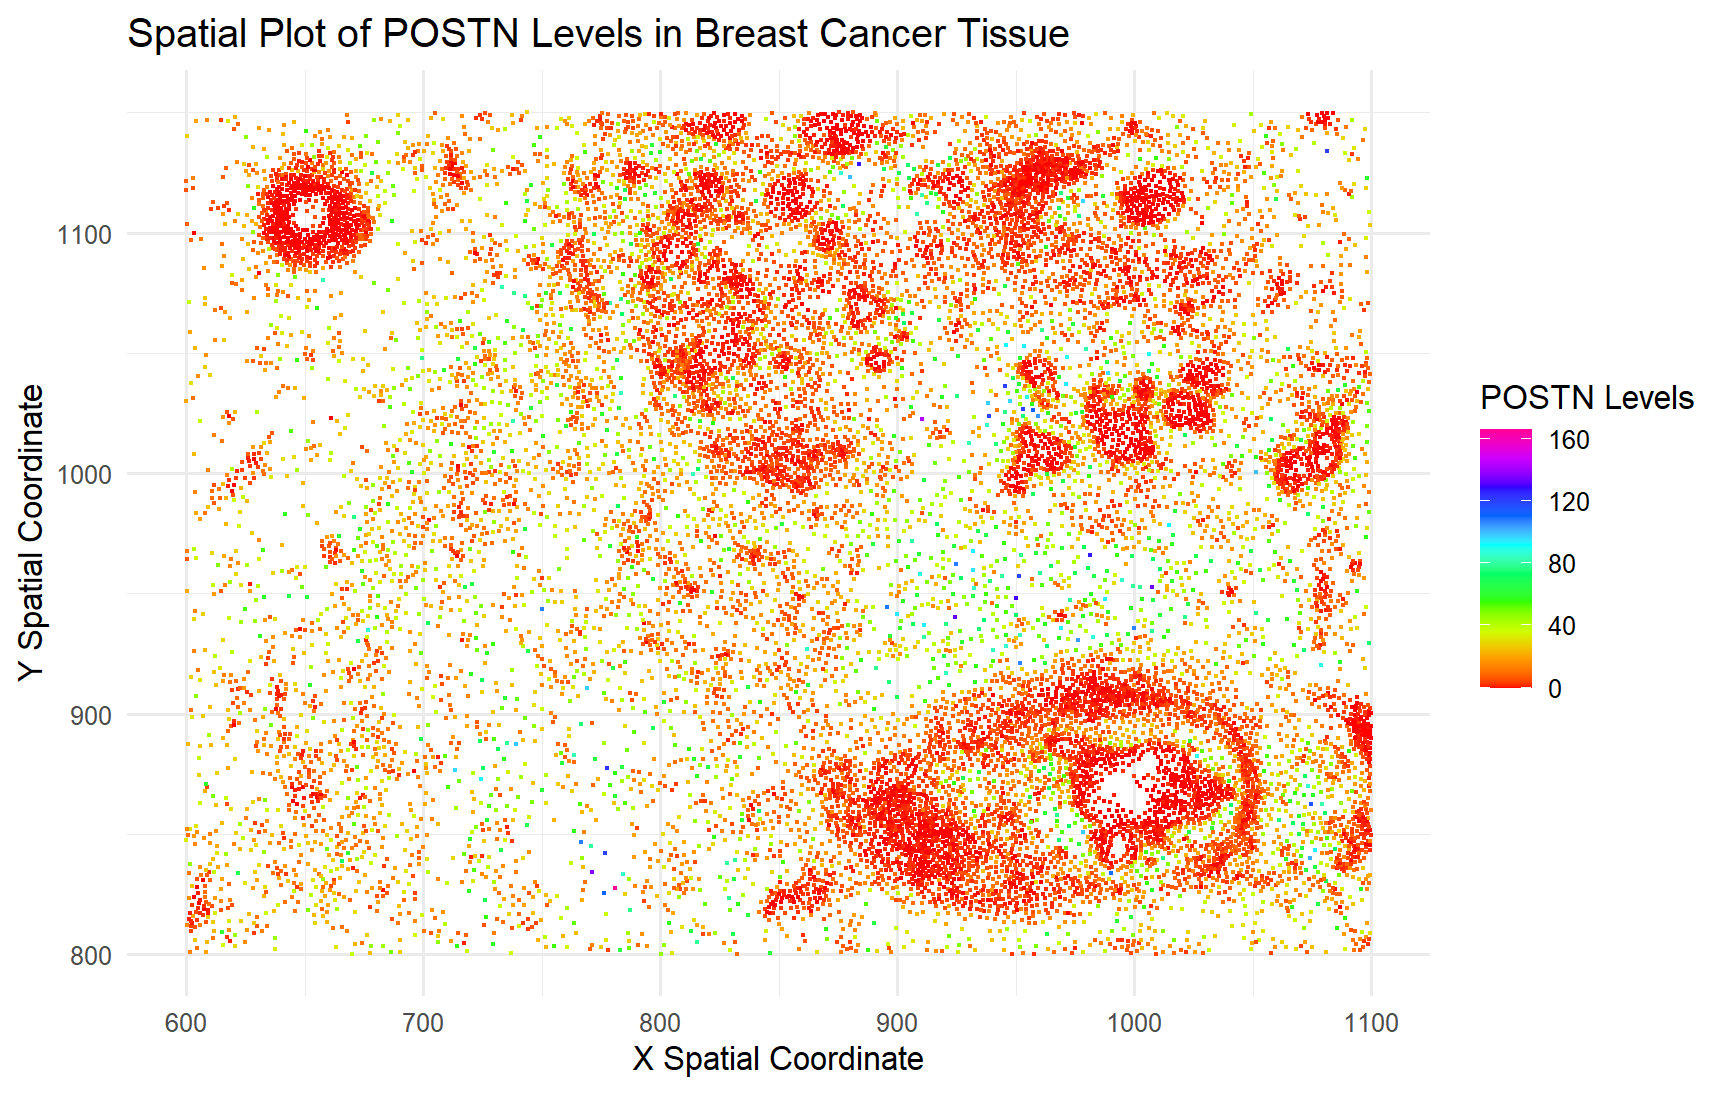 A Spatial Plot of POSTN Levels in Breast Cancer Tissue